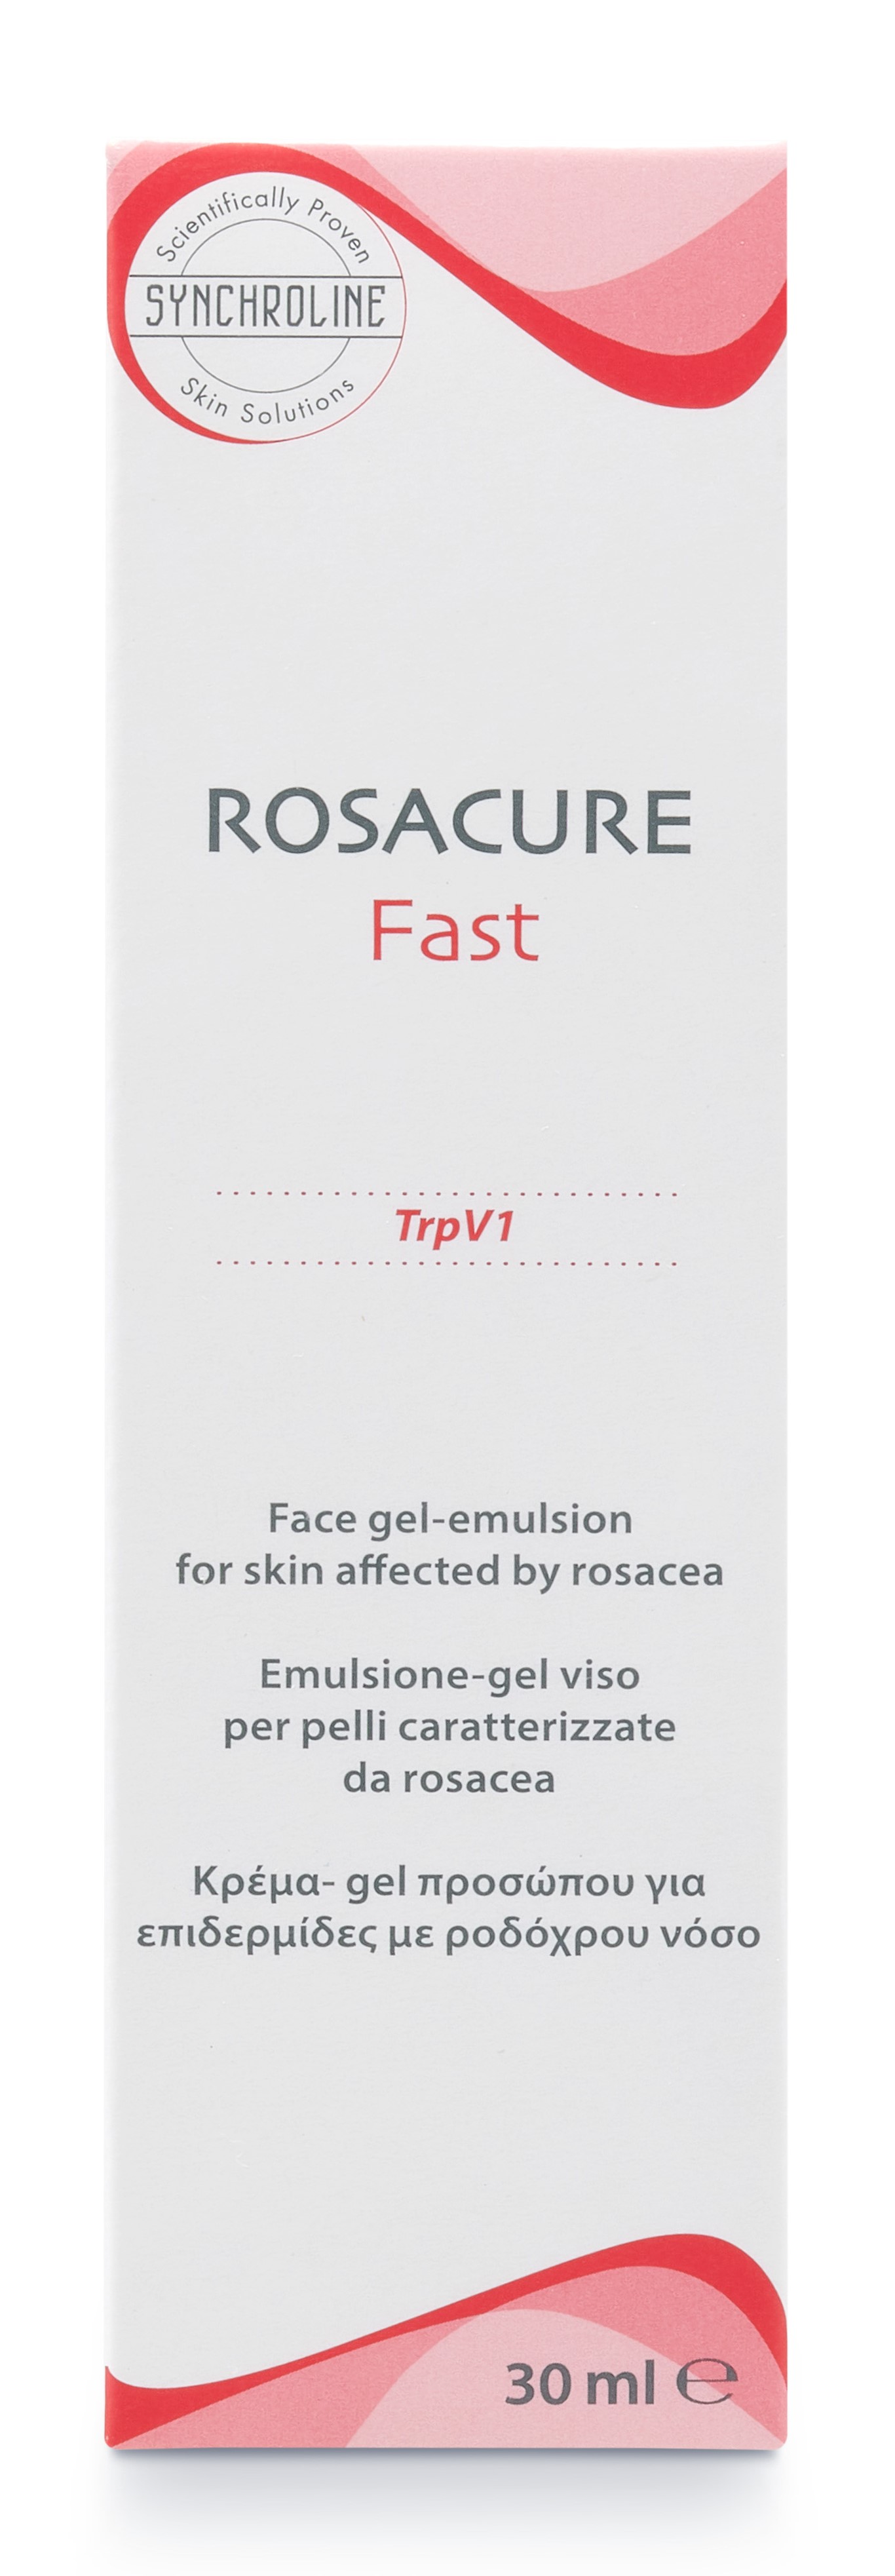 Rosacure Fast